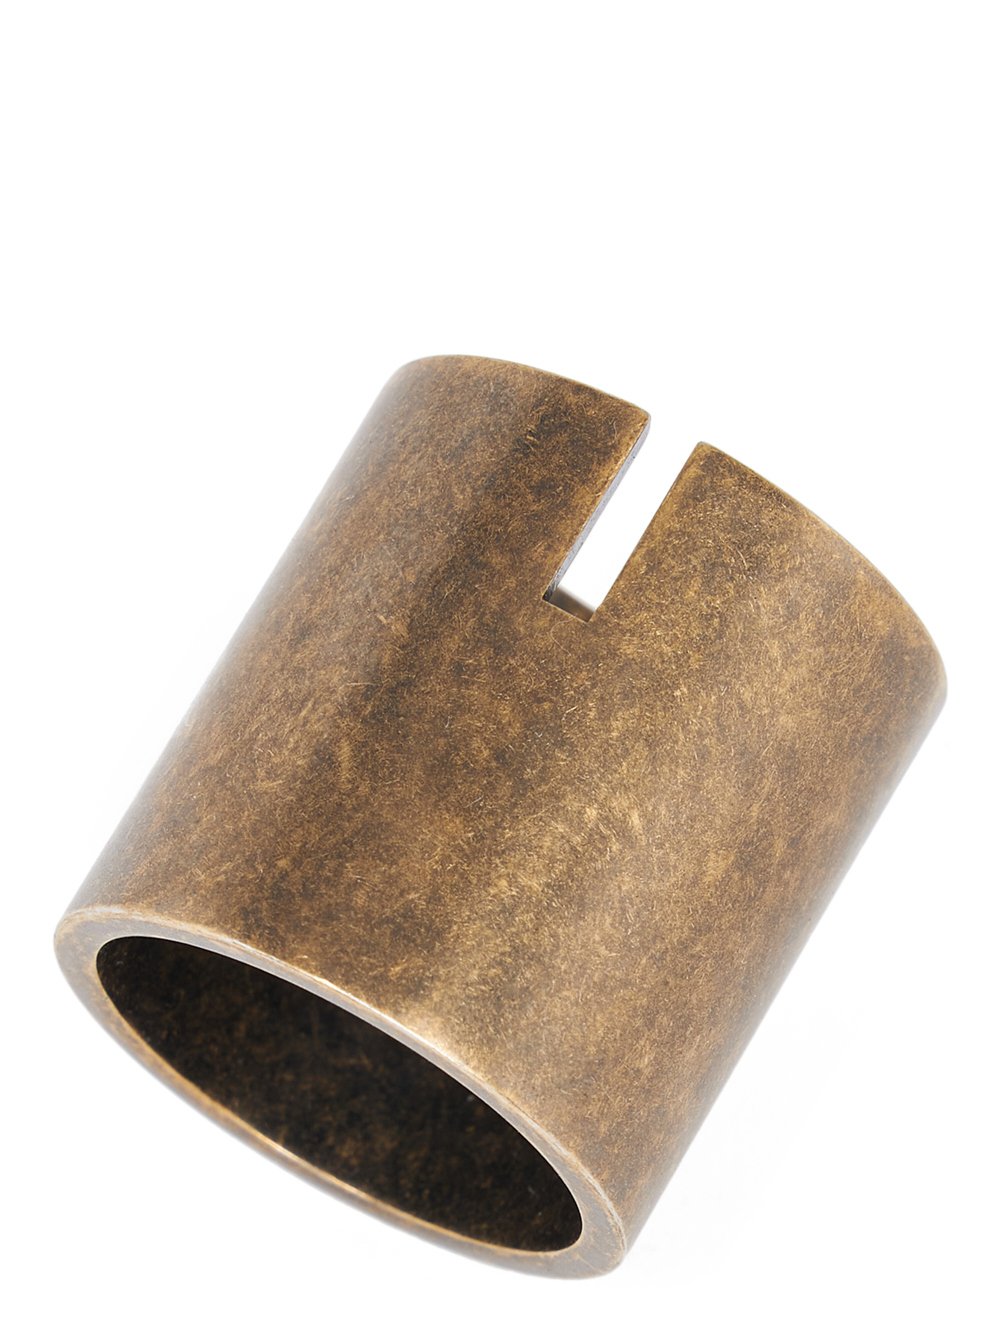 RICK OWENS SLITTED THUMB RING IN BRASS